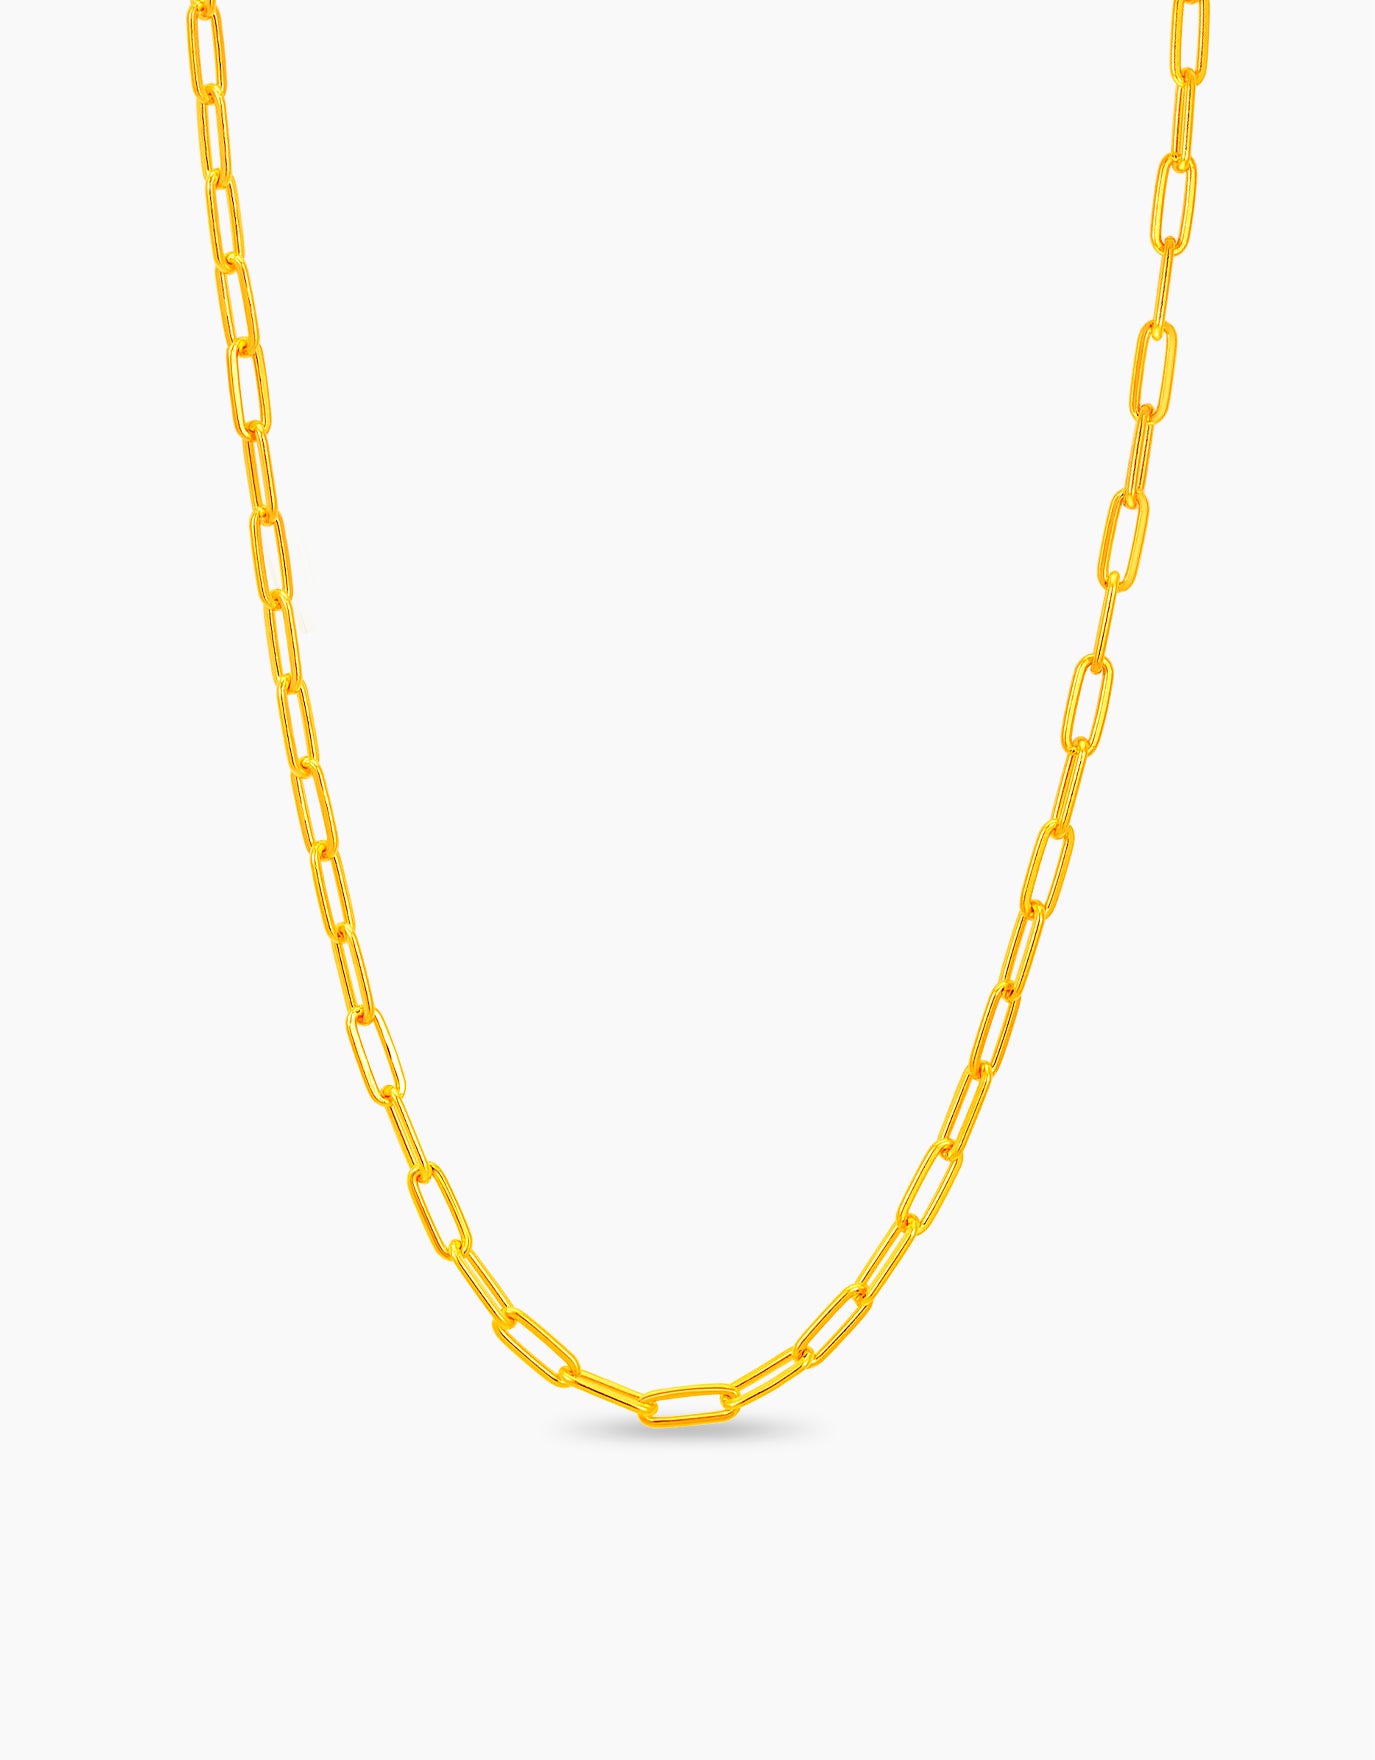 LVC 9IN Paperclip 999 Gold Chain